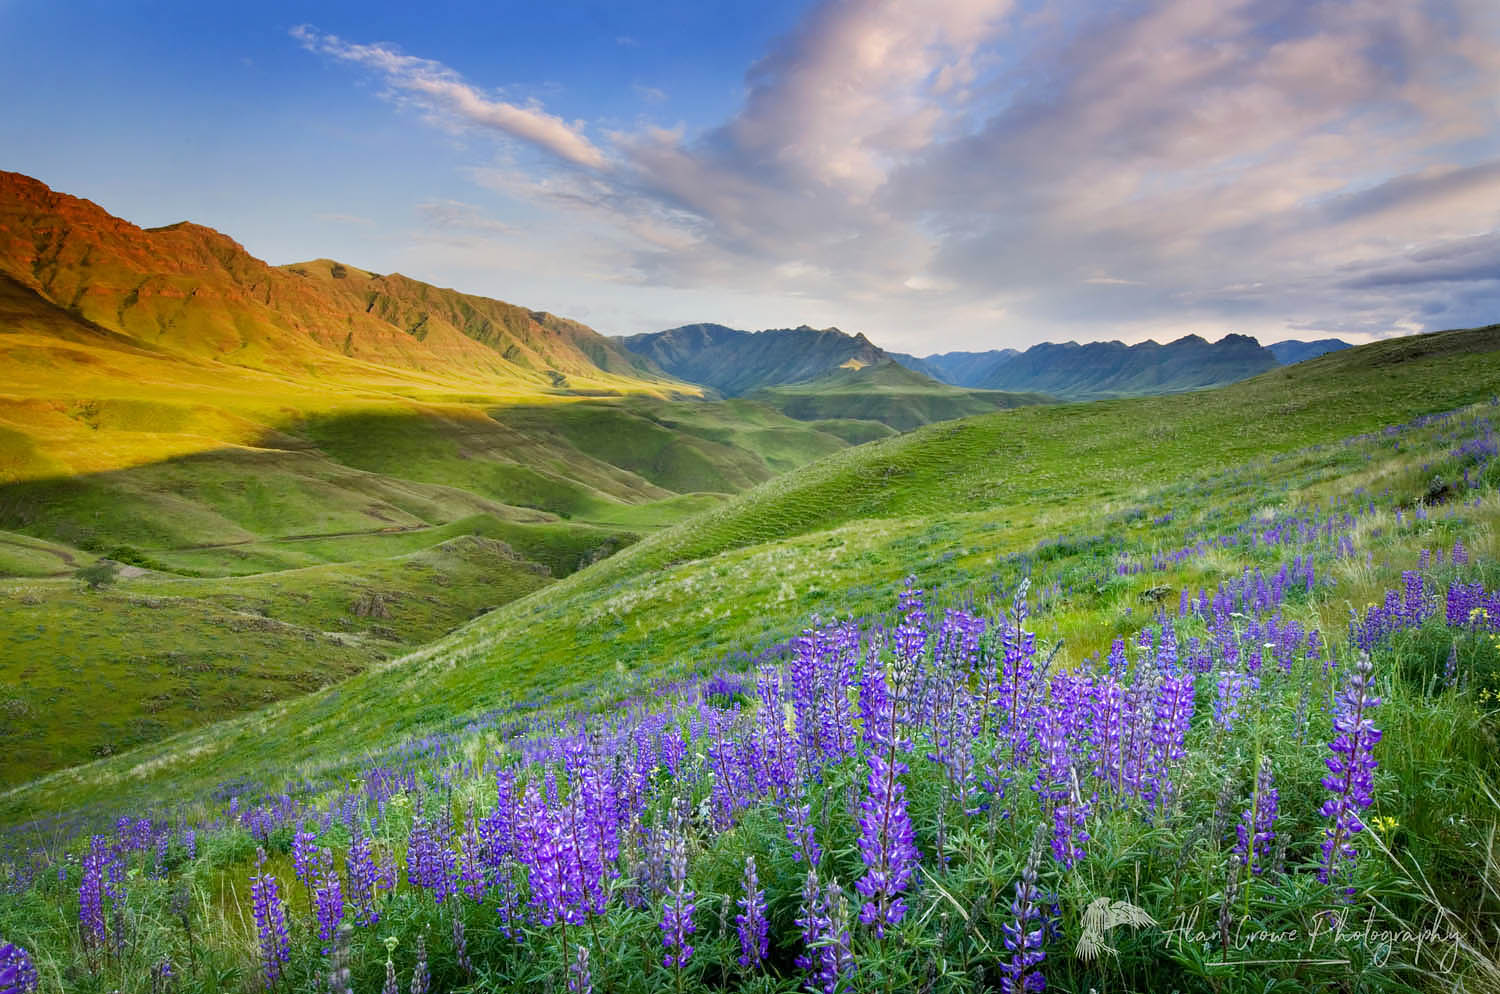 Blue lupines on the hills above the Imnaha River Canyon, Hells Canyon Recreation Area Oregon #45010